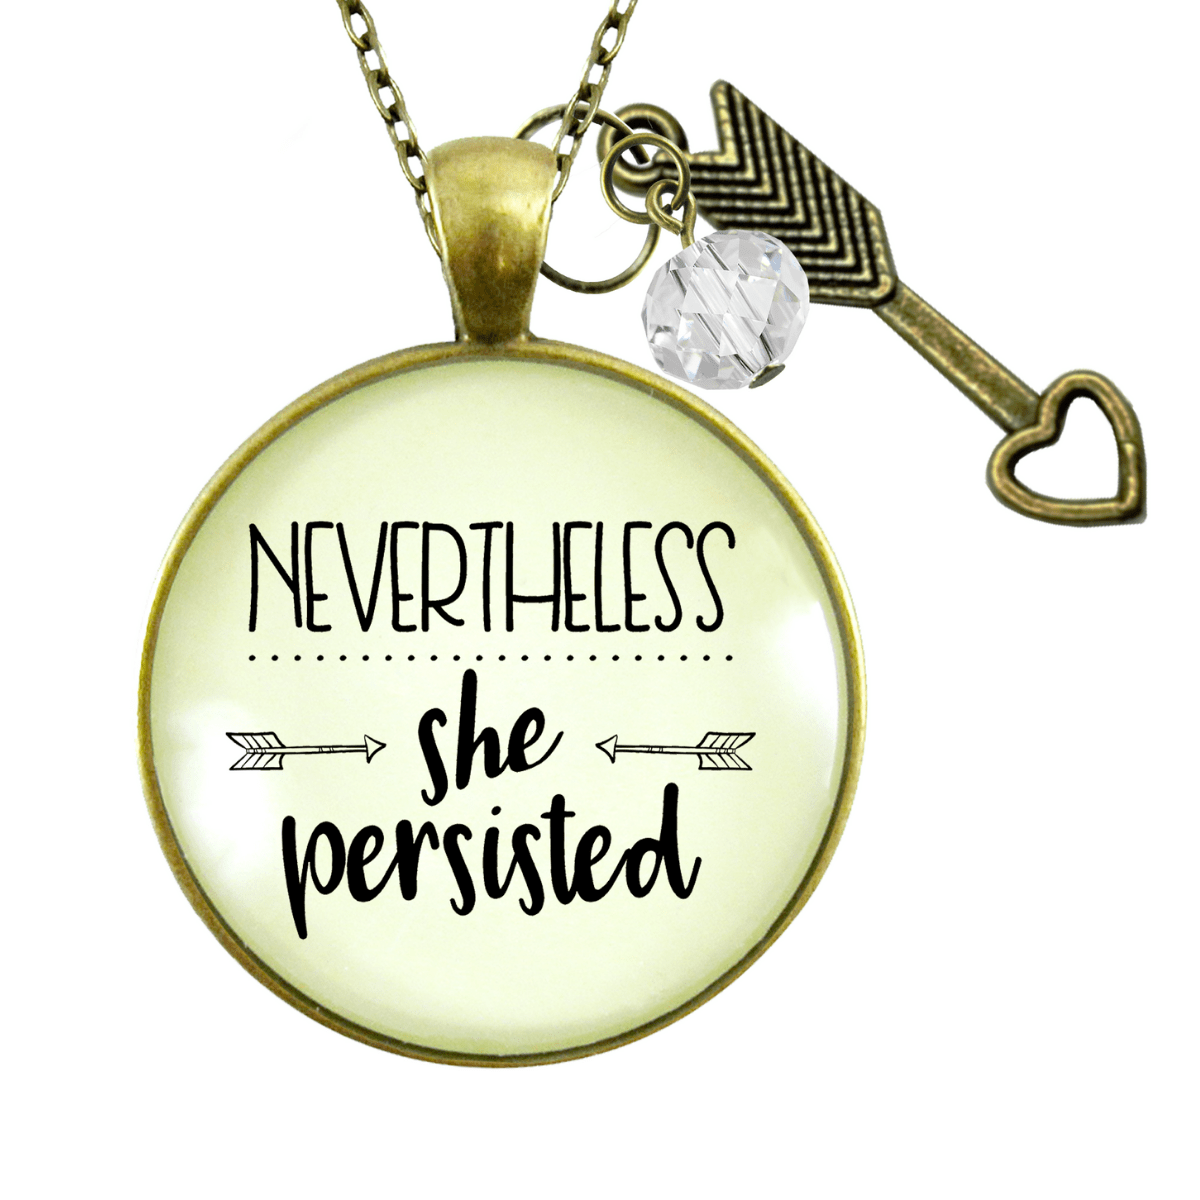 Gutsy Goodness Nevertheless She Persisted Necklace Hustle Success Quote Believe Jewelry - Gutsy Goodness Handmade Jewelry;Nevertheless She Persisted Necklace Hustle Success Quote Believe Jewelry - Gutsy Goodness Handmade Jewelry Gifts